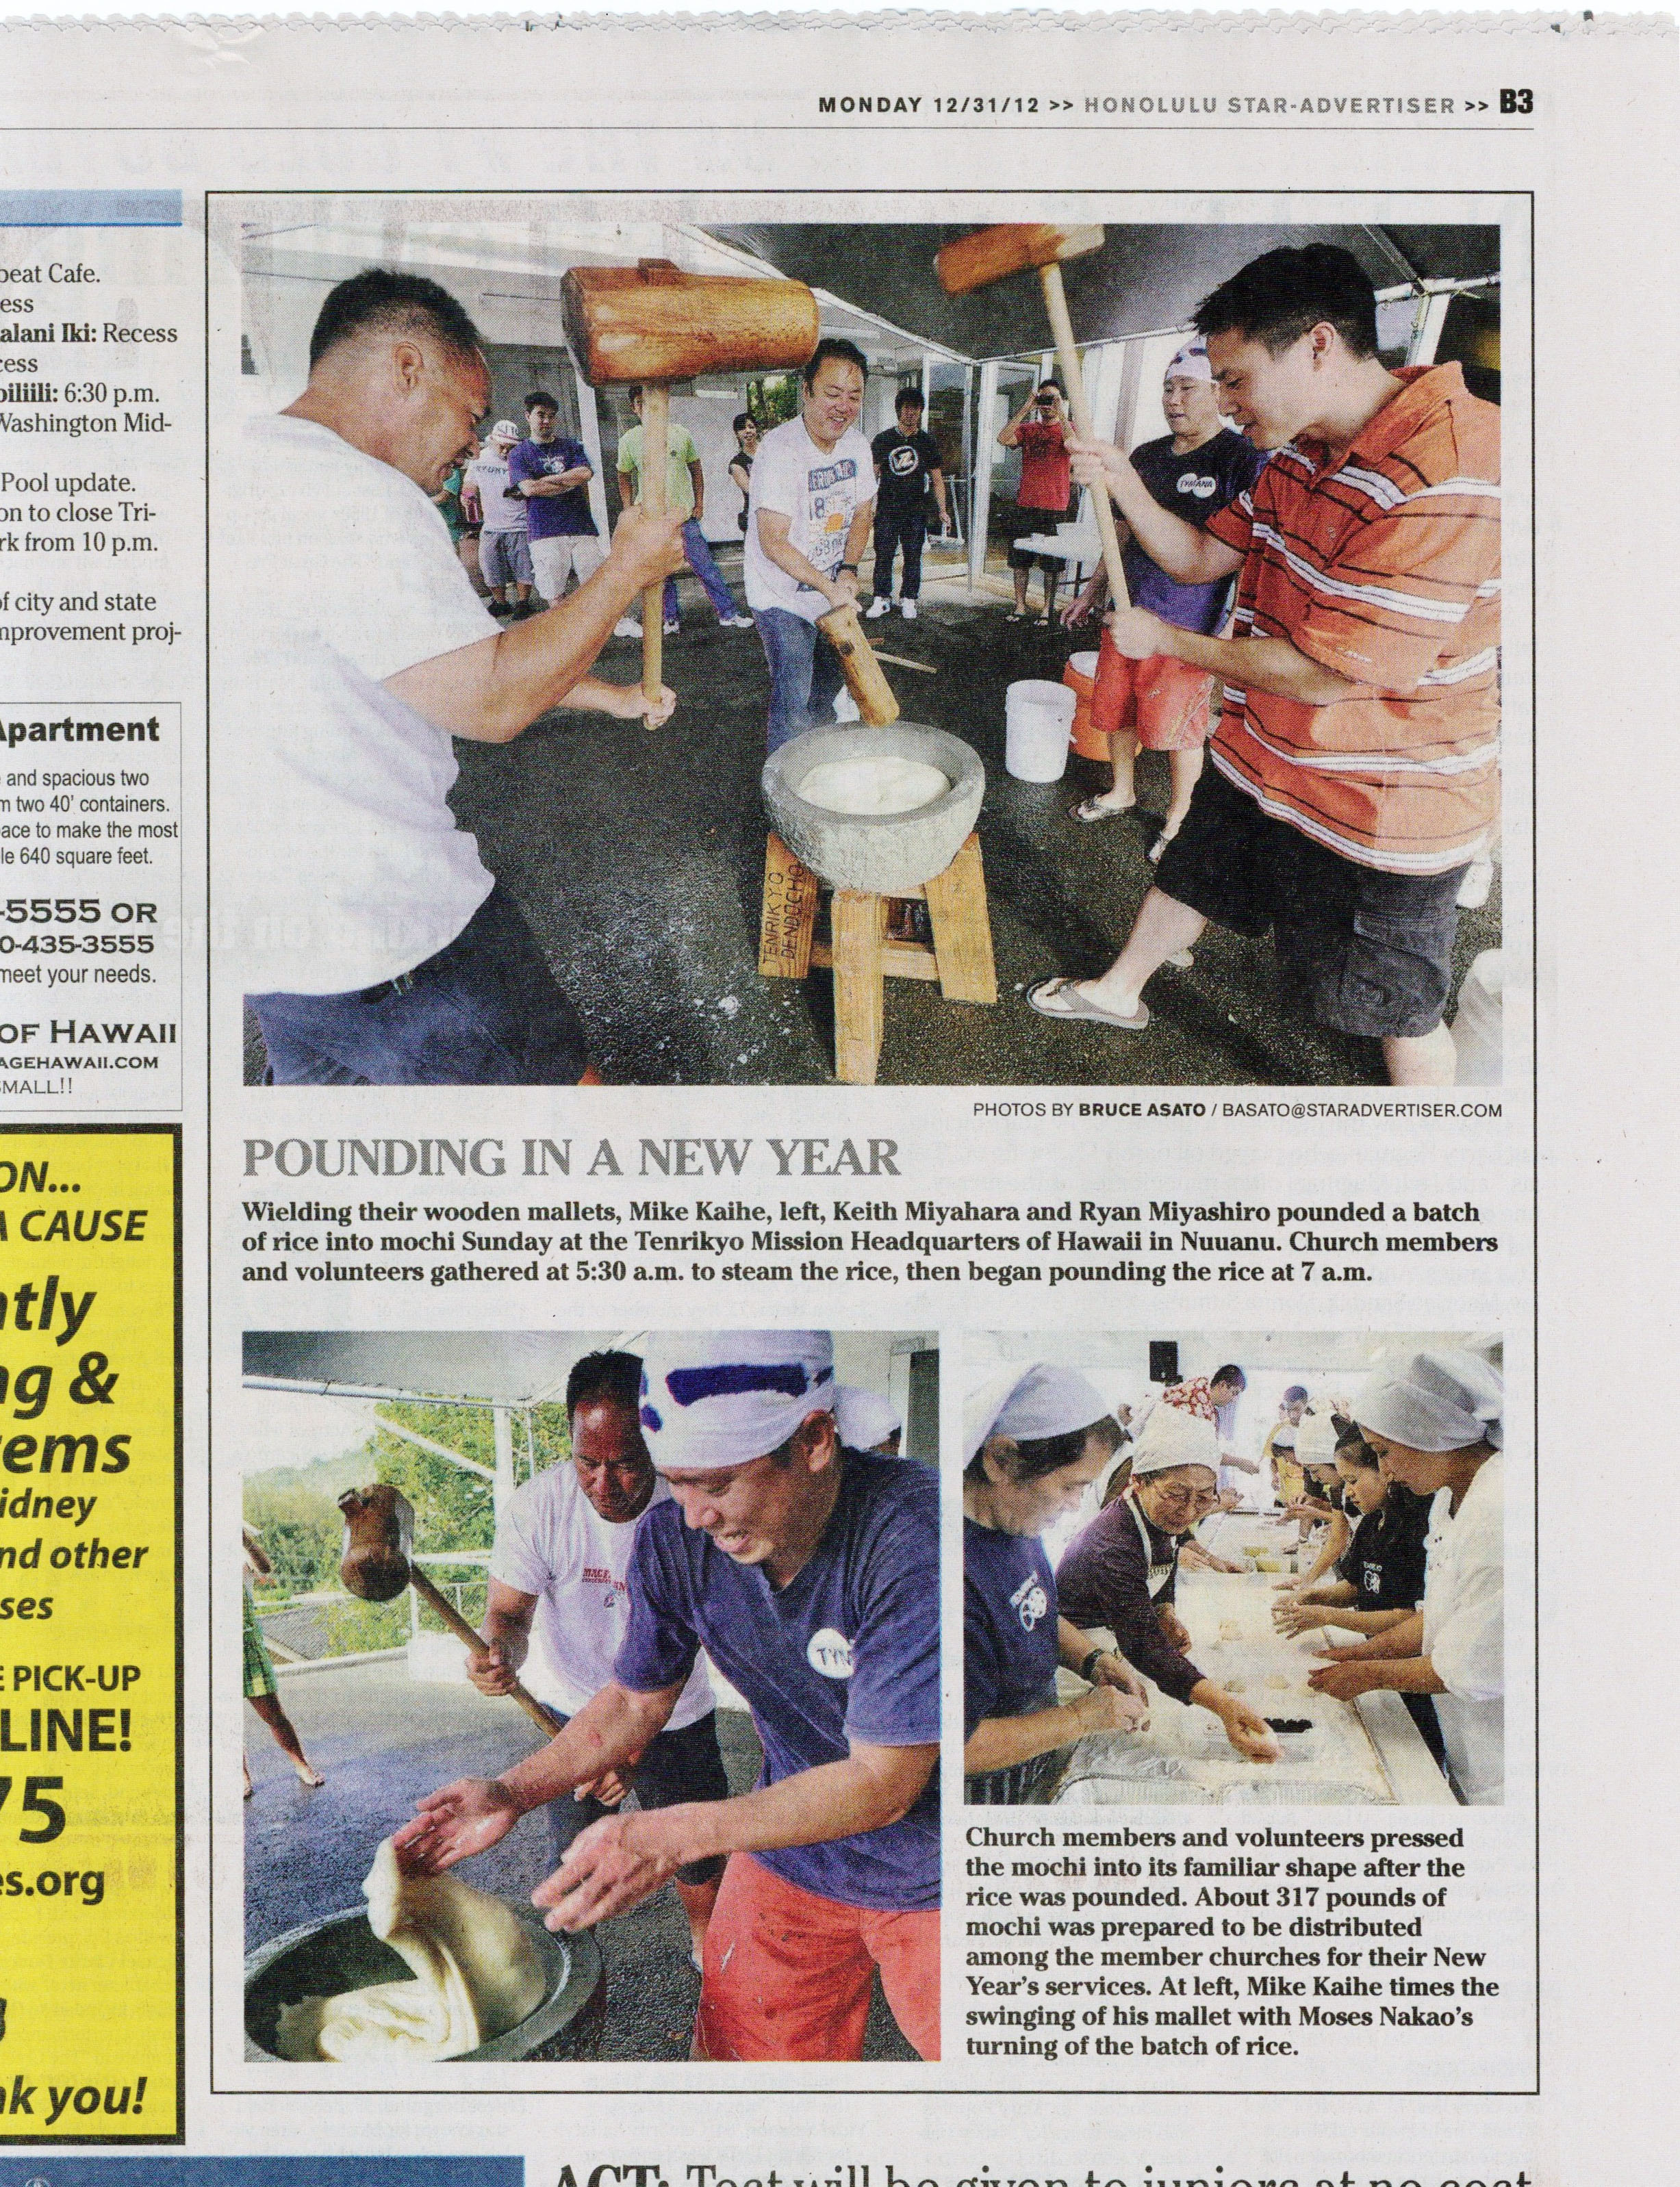 Dendocho Mochi pounding featured on Star-Advertiser